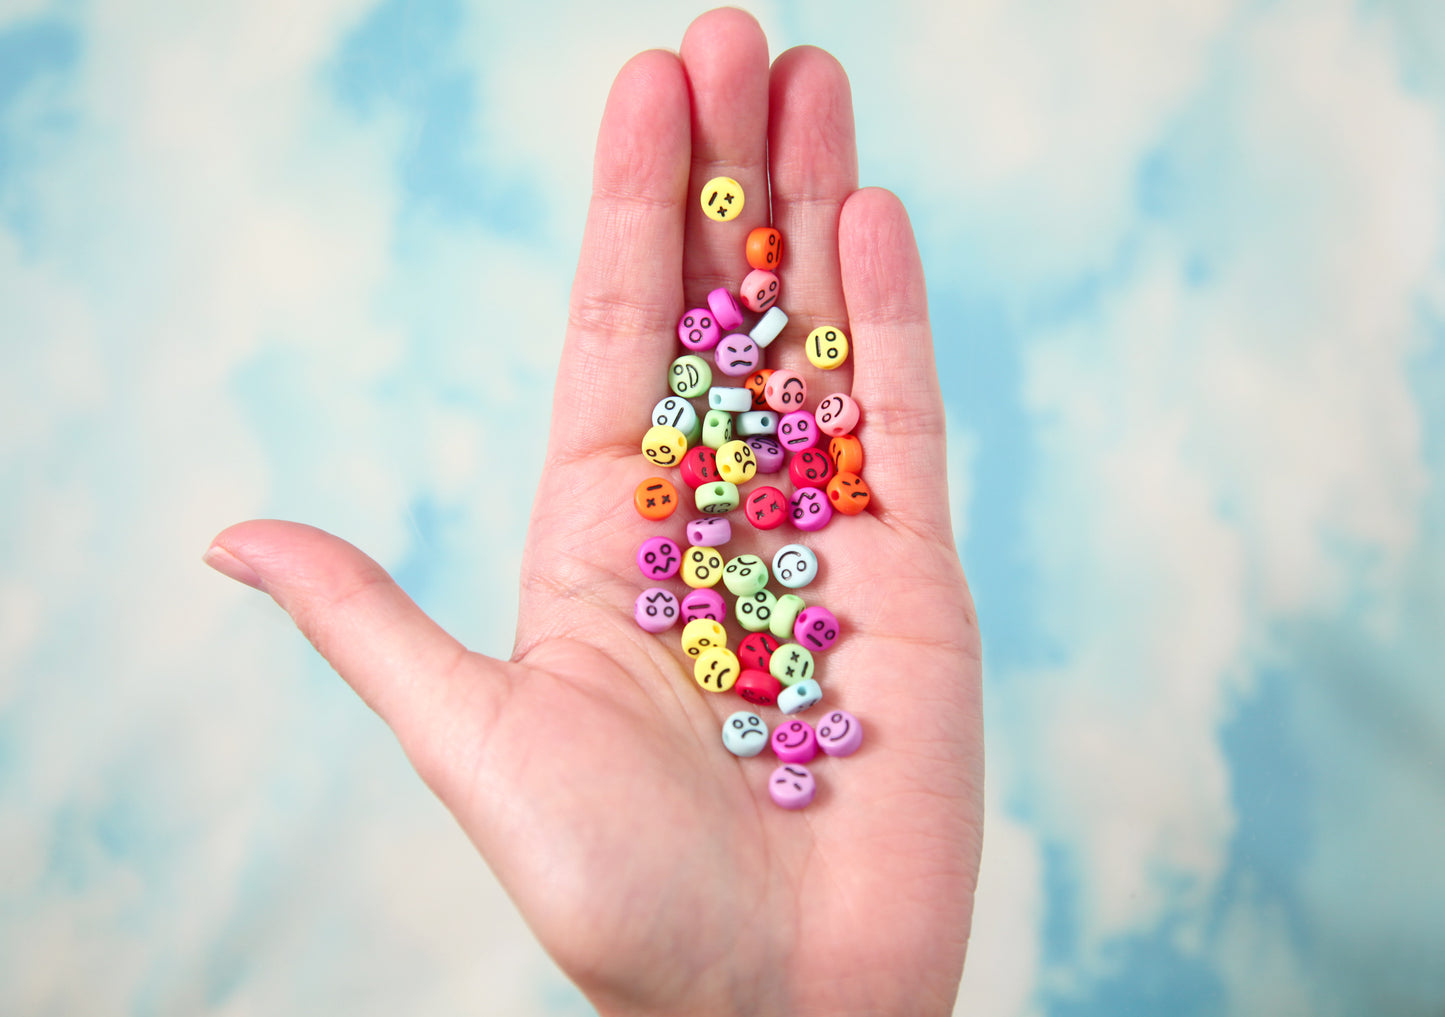 Face Beads - 7mm Tiny Mixed Expression Happy Face Smile Emoji Bead Shape Acrylic or Resin Beads - 300 pc set